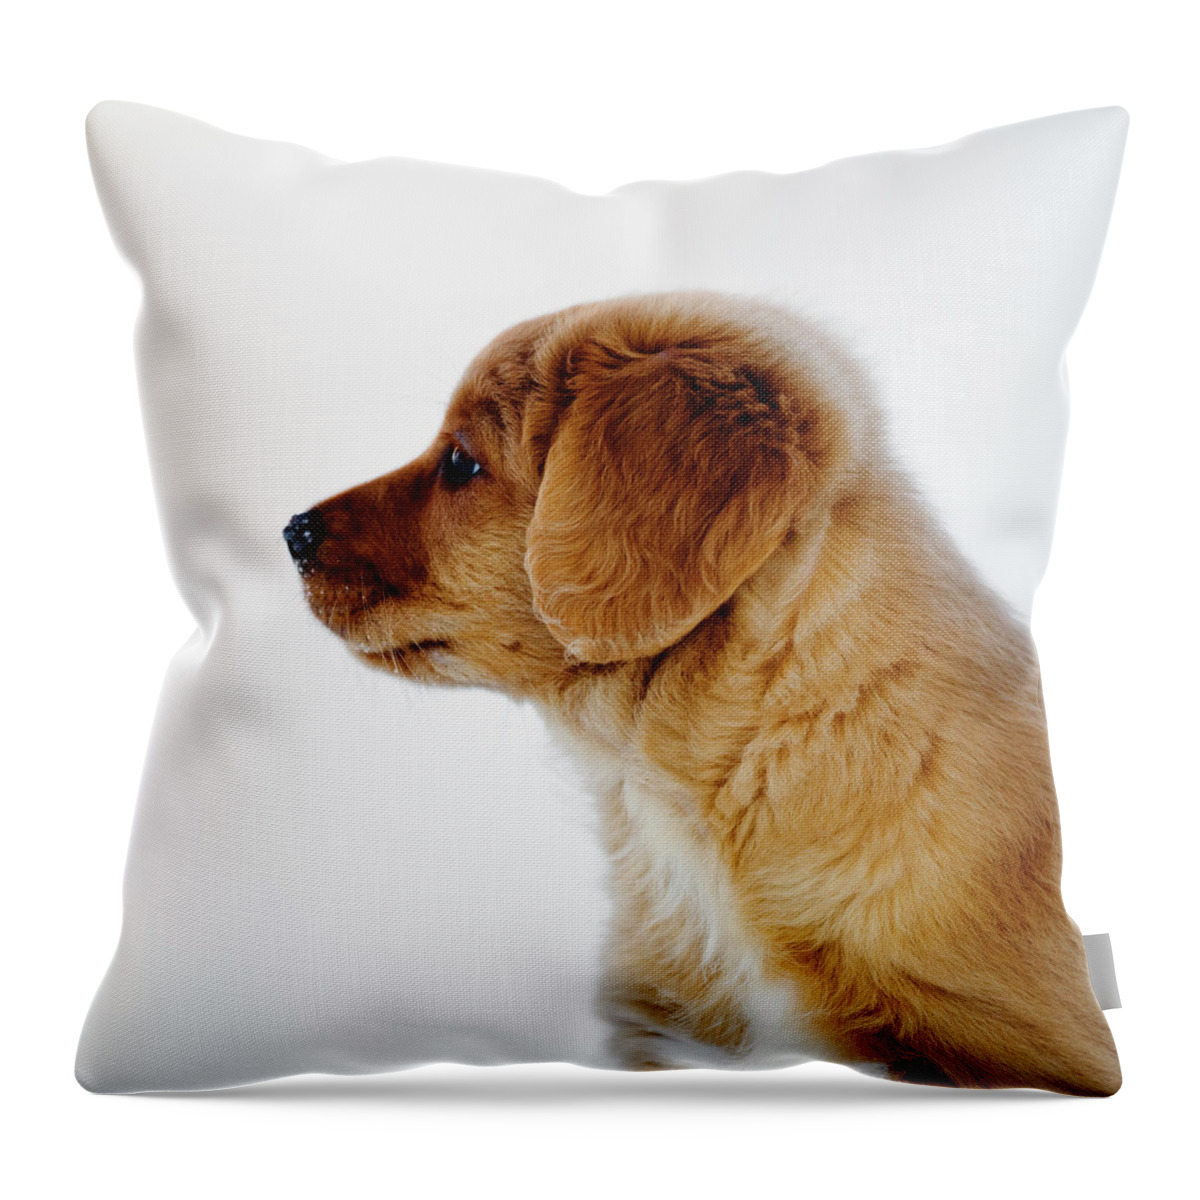 Pets Throw Pillow featuring the photograph Nova Scotia Duck Tolling Retriever by Roine Magnusson